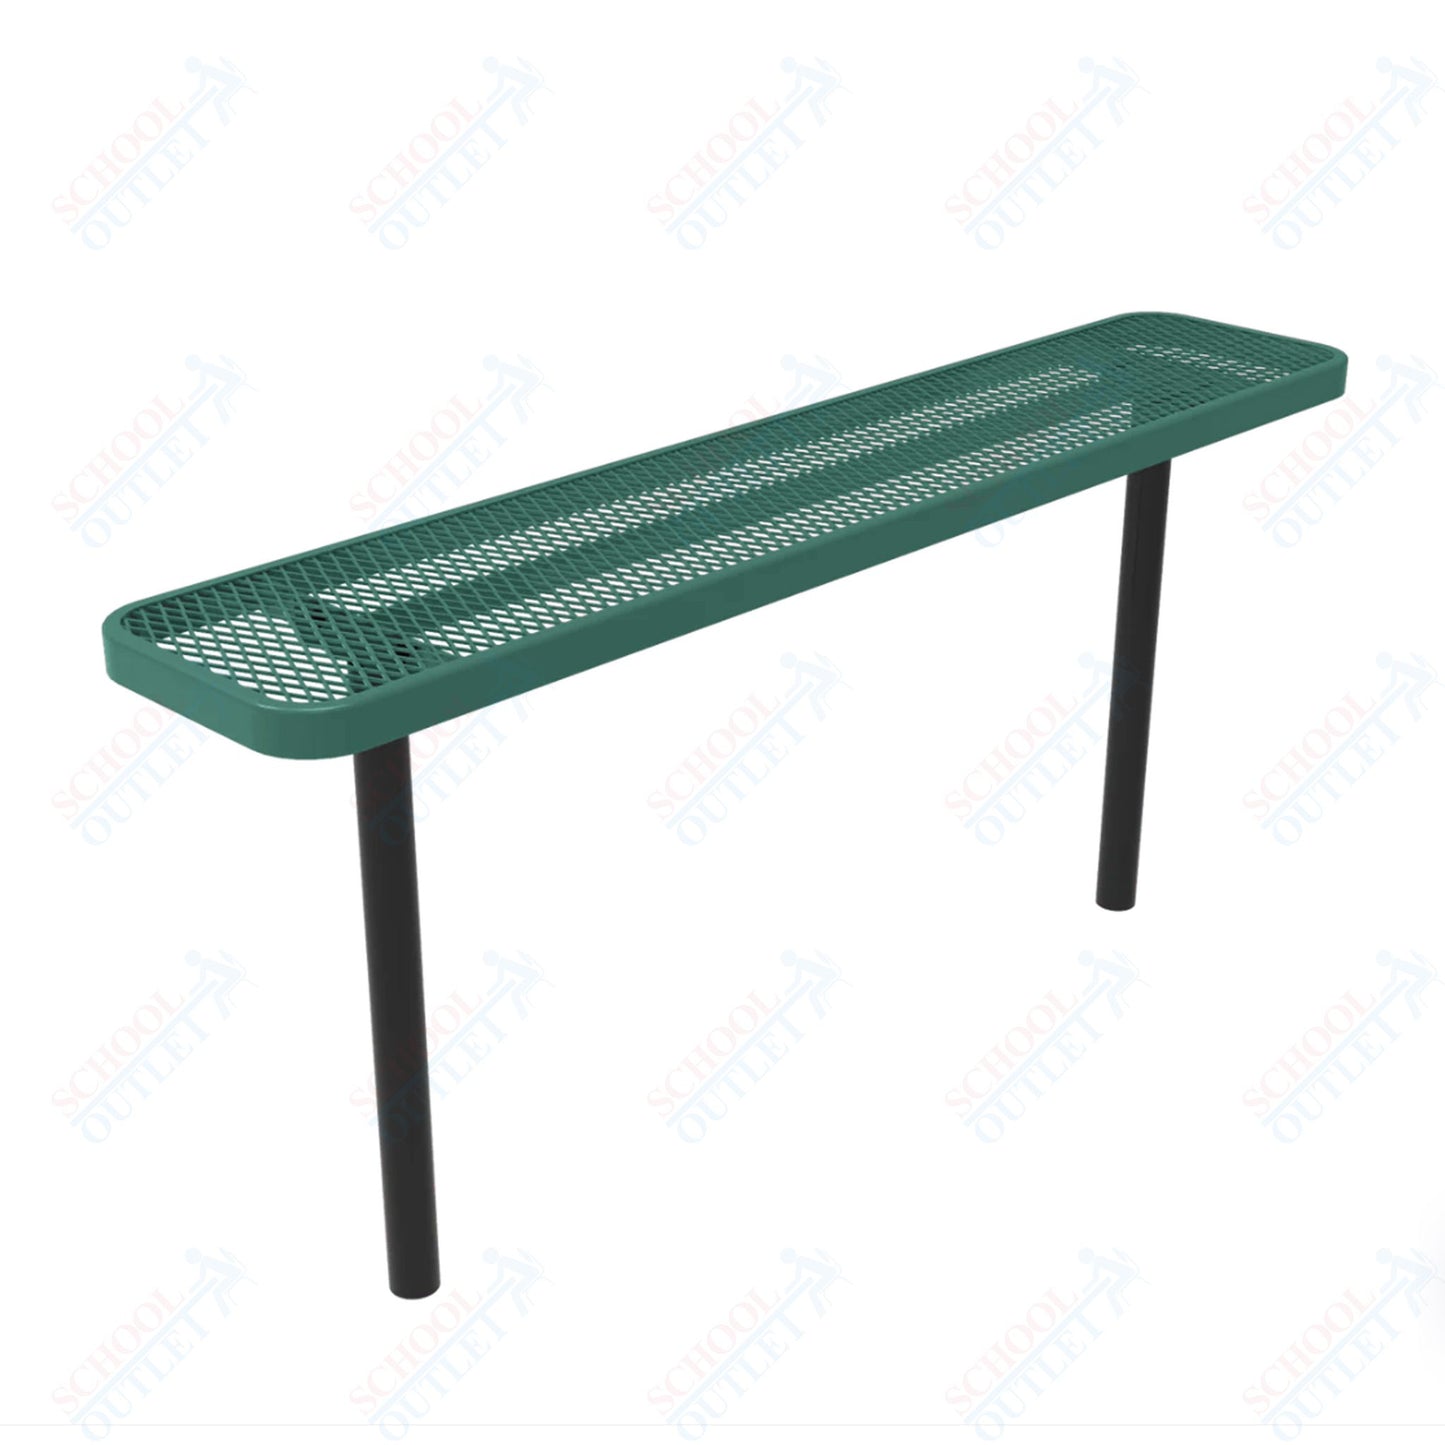 MyTcoat - Player's Outdoor Bench without Back - Inground Mount 4' L (MYT-BPY04-34)